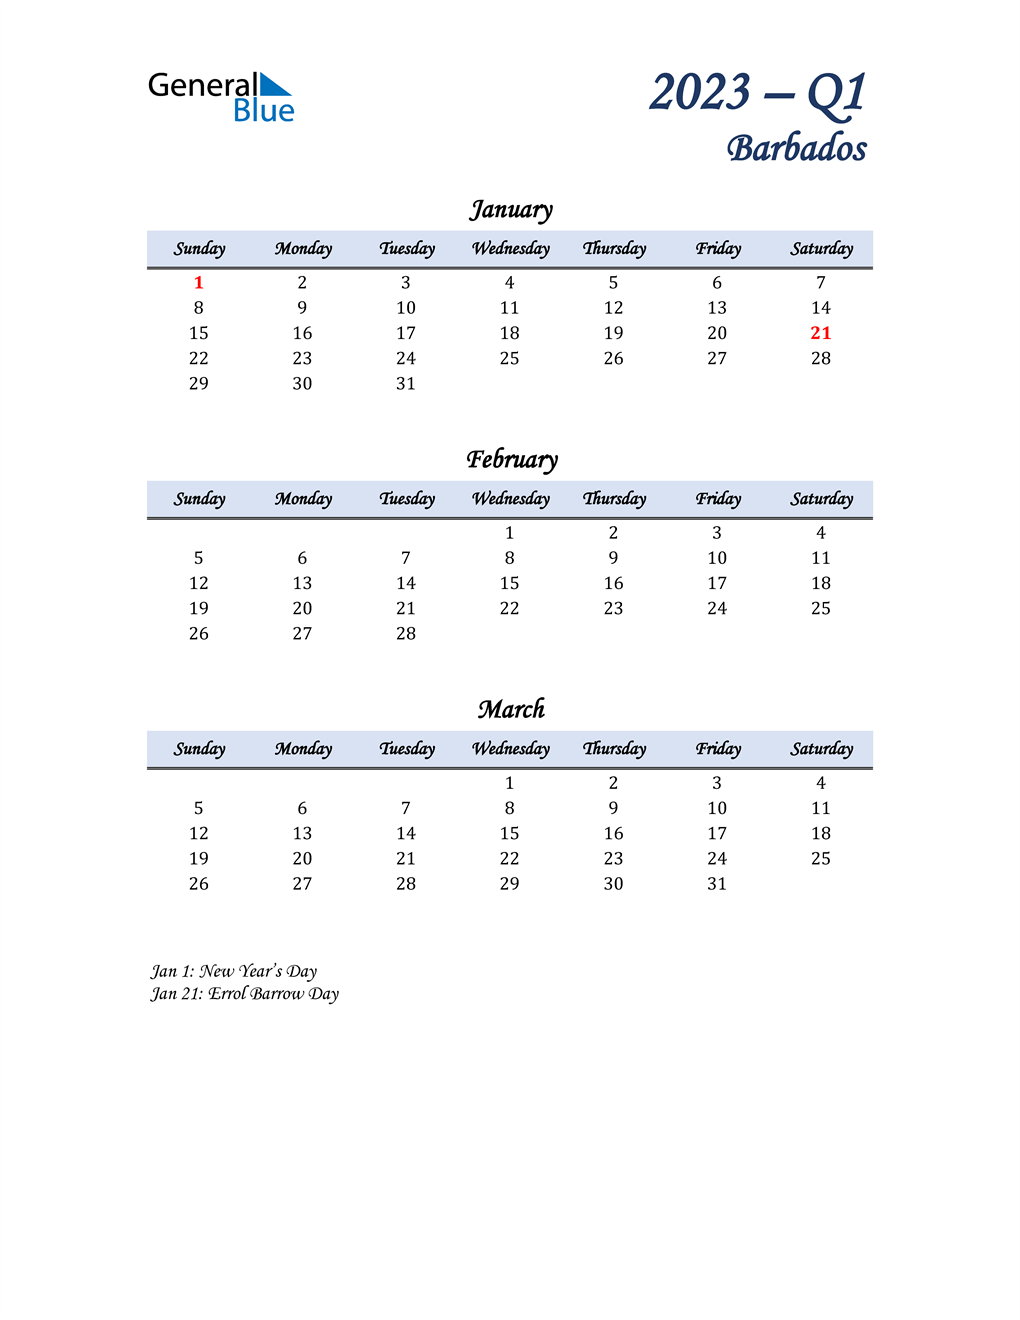  January, February, and March Calendar for Barbados